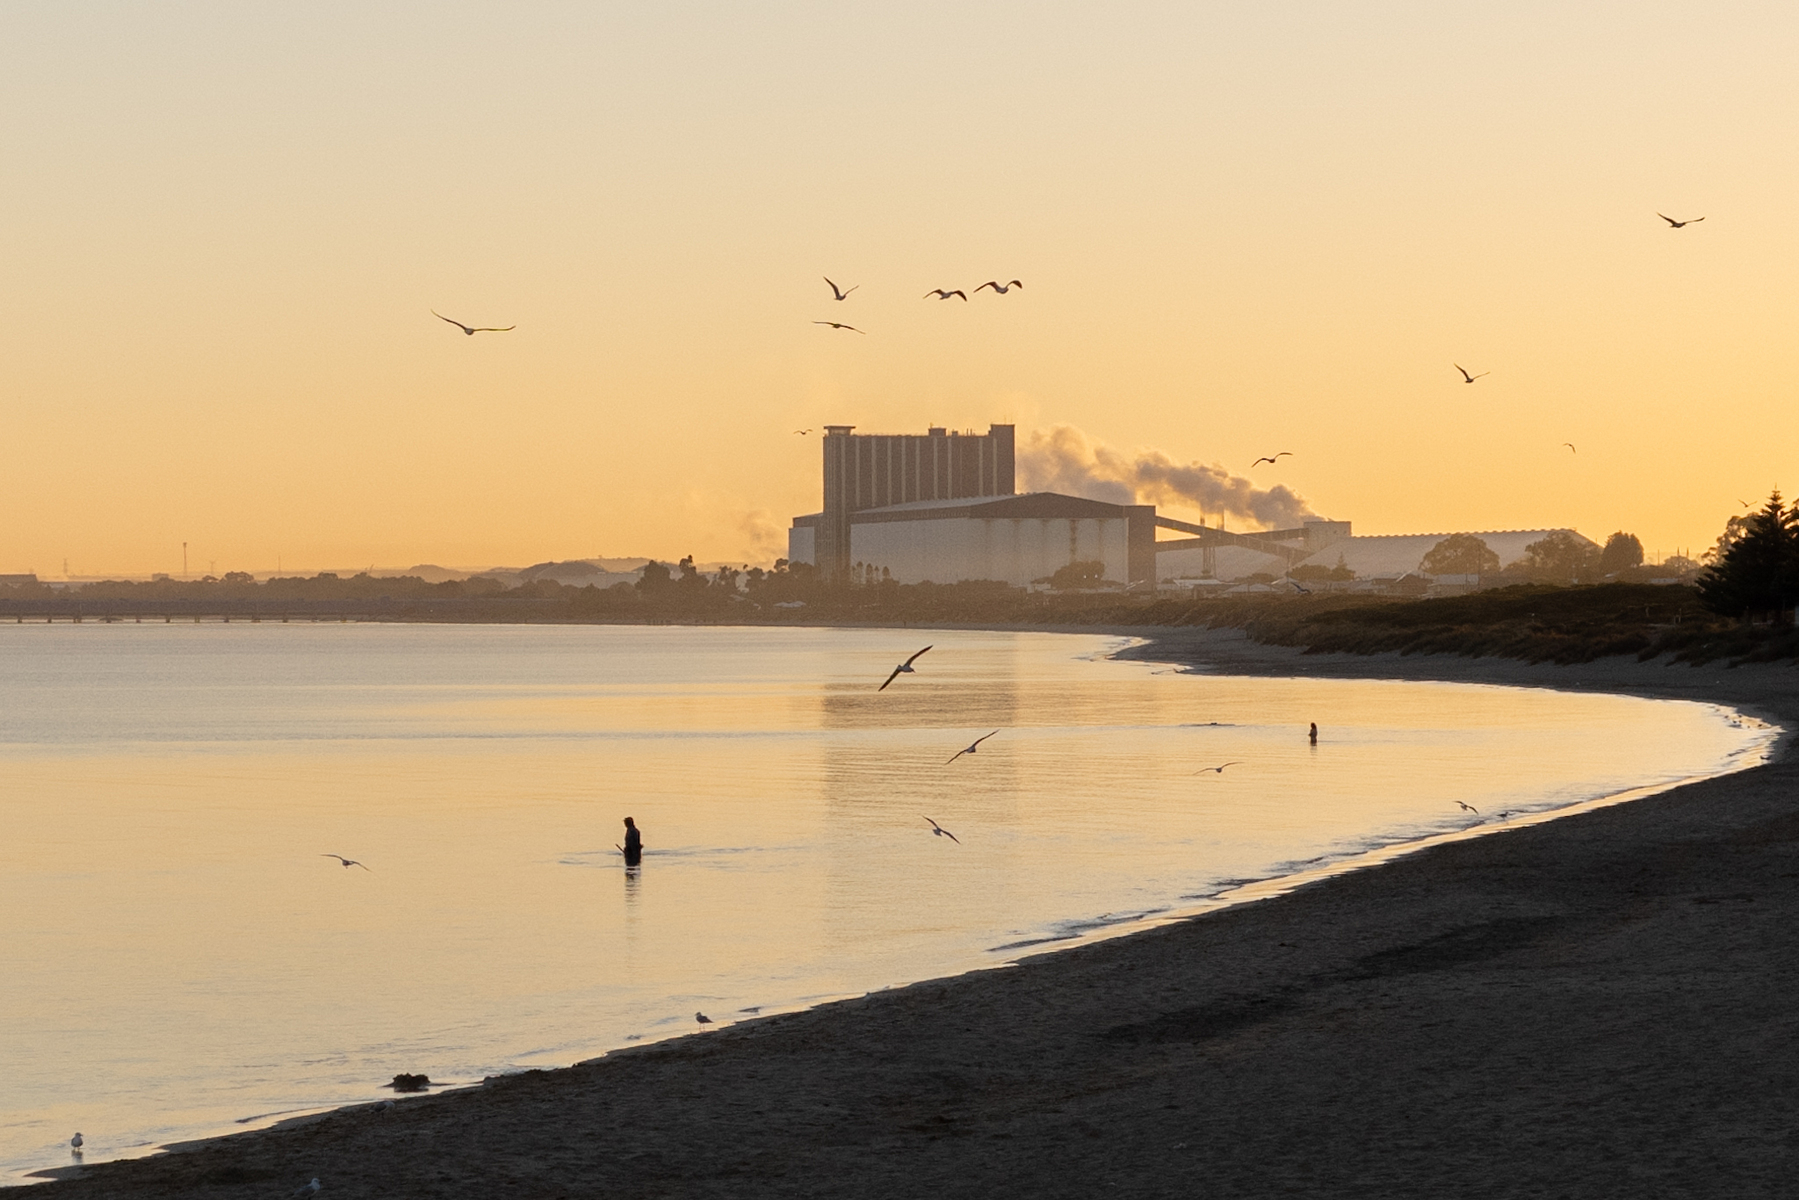 A serene sunrise blankets the sky, casting a golden hue over the beach where birds fly and a lone figure stands near the water's edge, with industrial structures and smokestacks looming in the background.